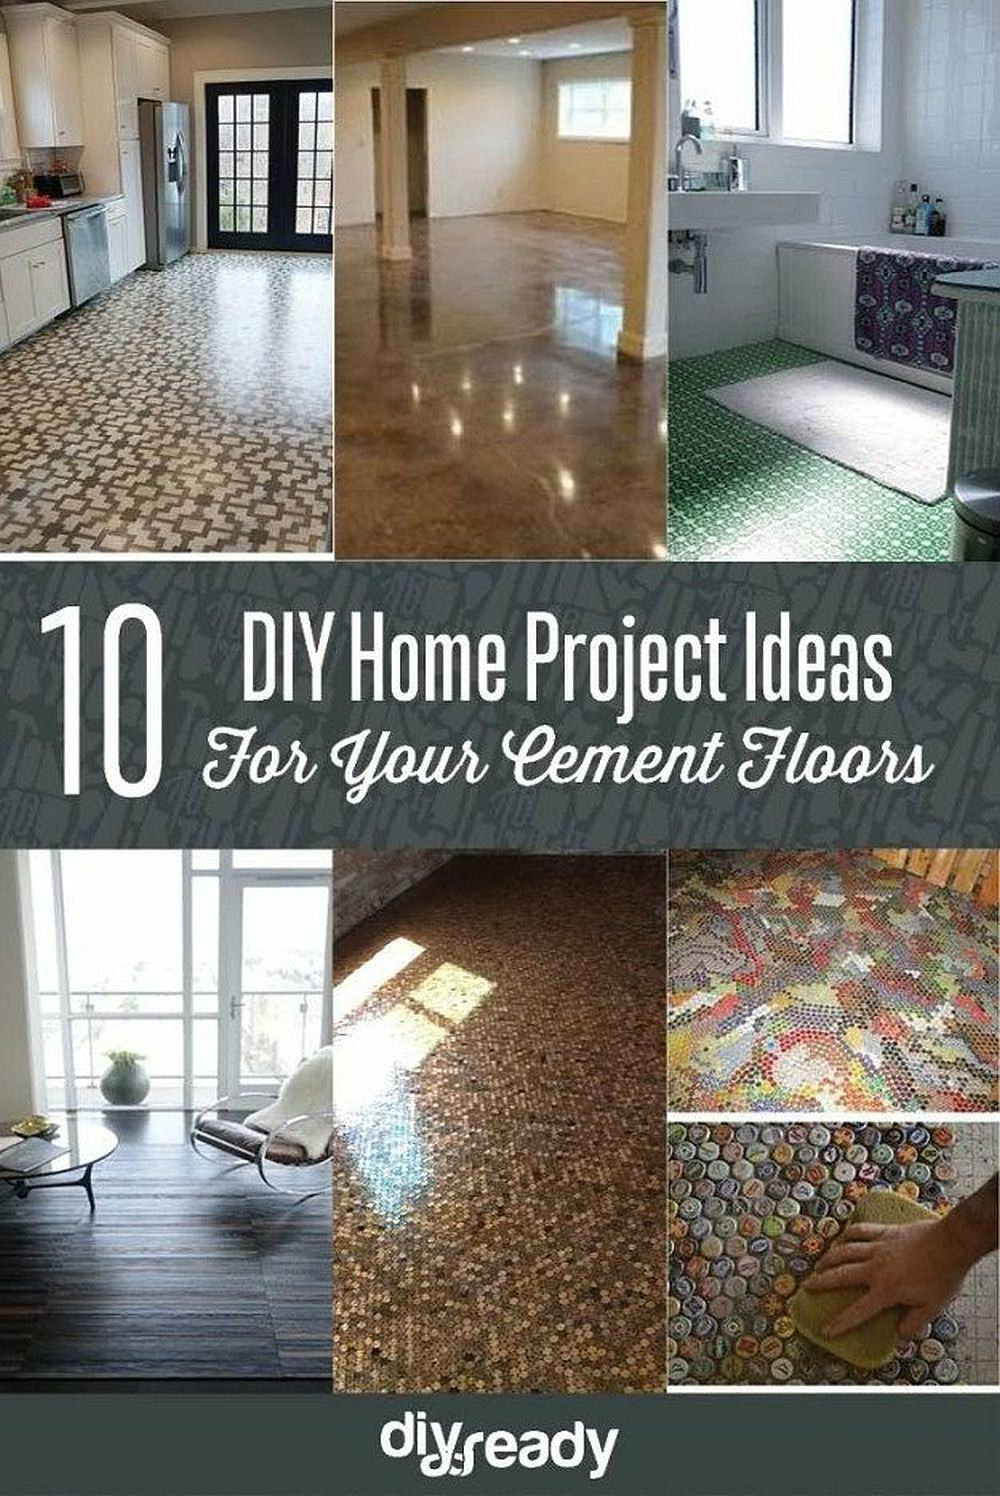 Home Project Ideas
 Home Improvement Hack Ideas DIY Projects Craft Ideas & How